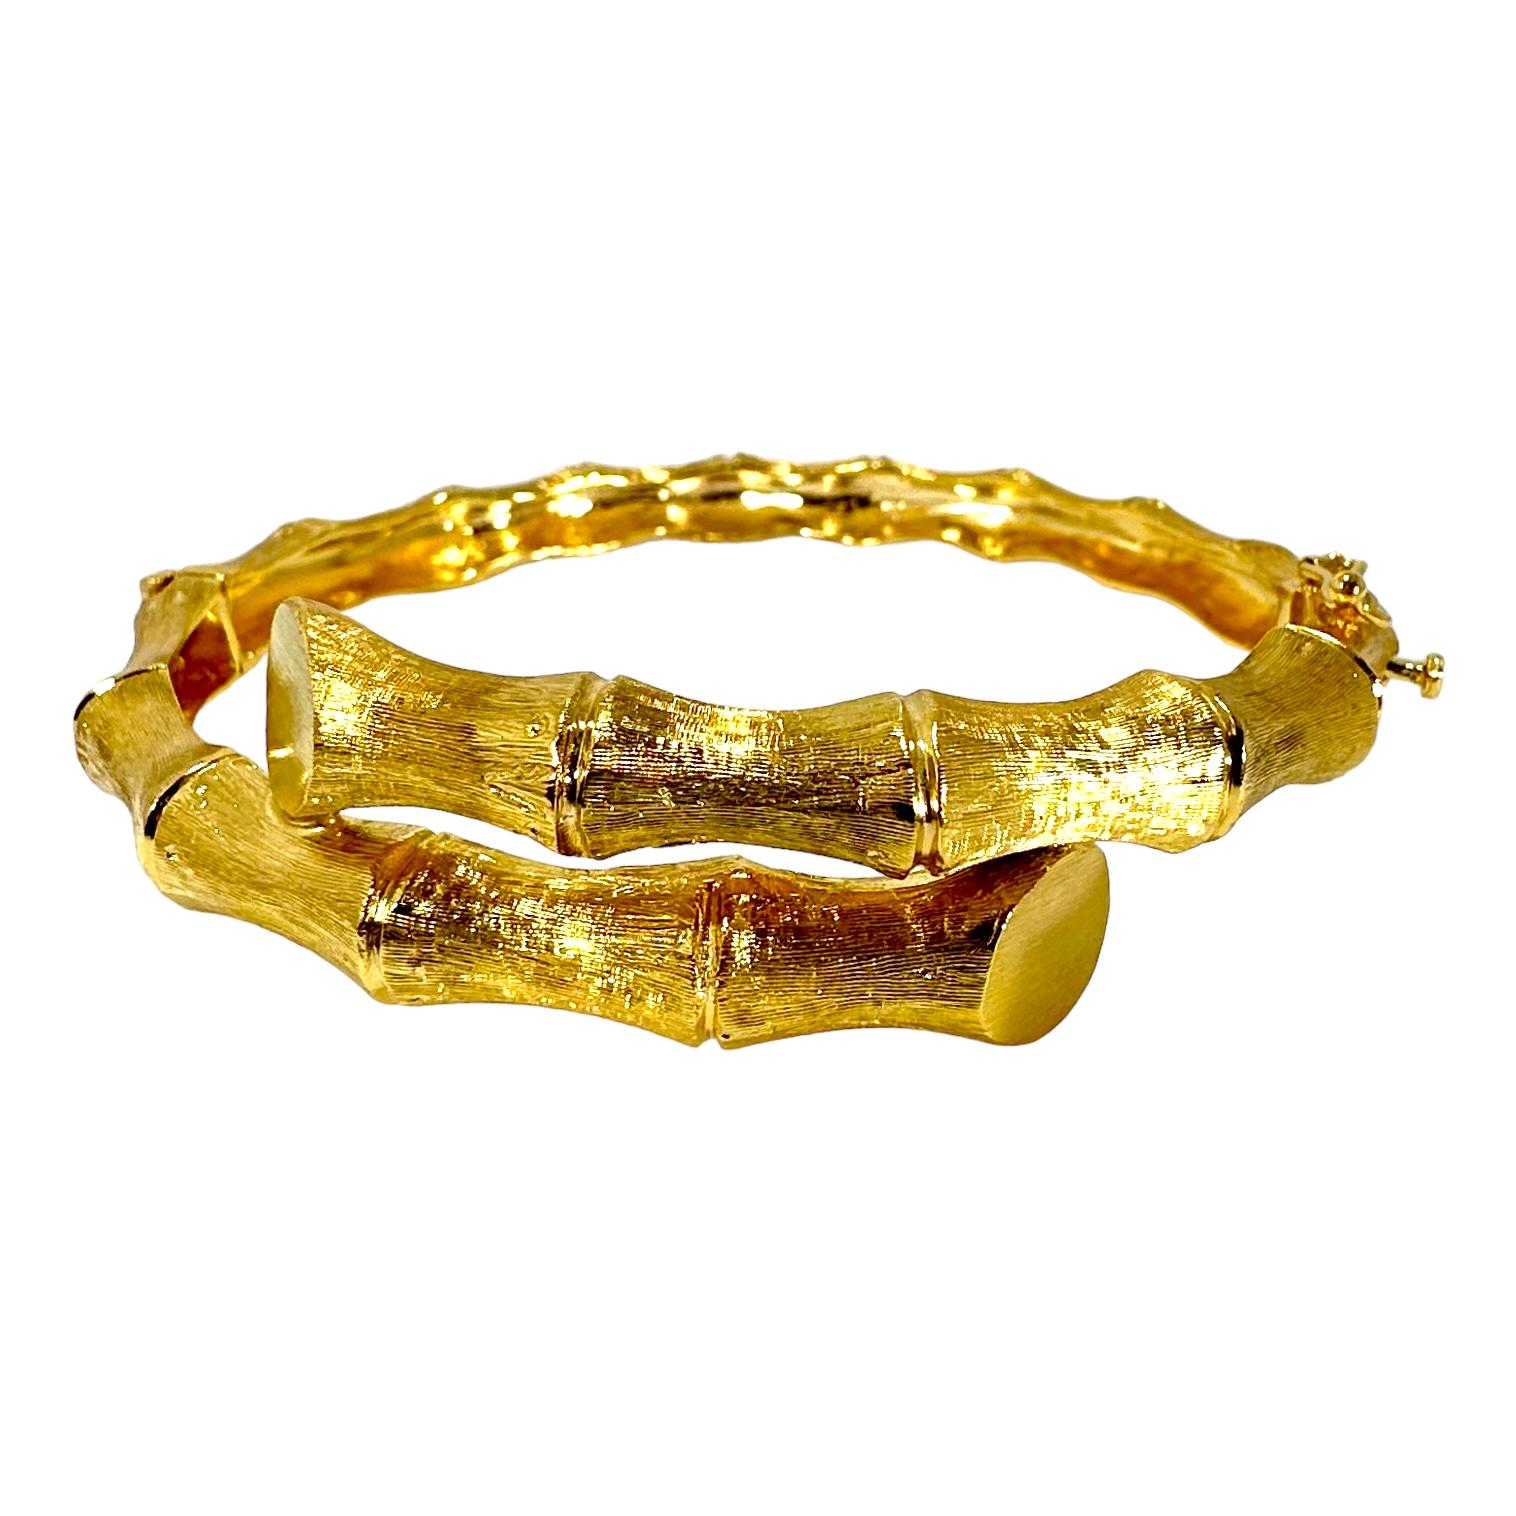 This tailored, bamboo motif, 14K yellow bypass bangle bracelet is a beautiful example of this genre. At the front, in the center, the bracelet measures almost 3/4 inch in width and tapers down to 1/4 inch at the rear. Every surface is single